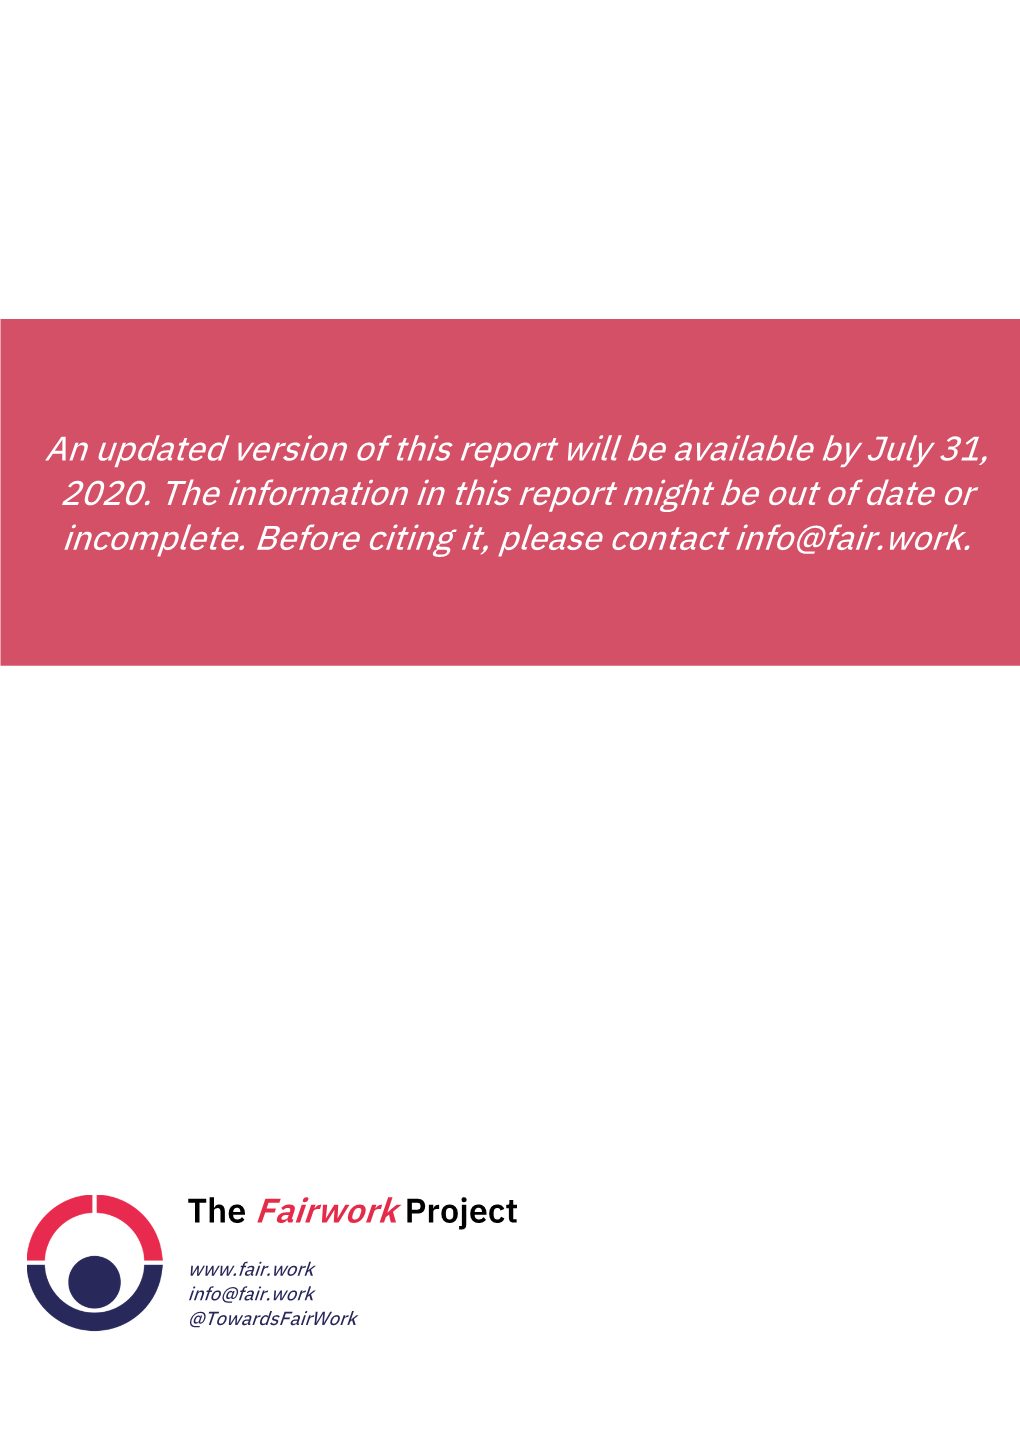 The Gig Economy and Covid-19: Fairwork Report on Platform Policies